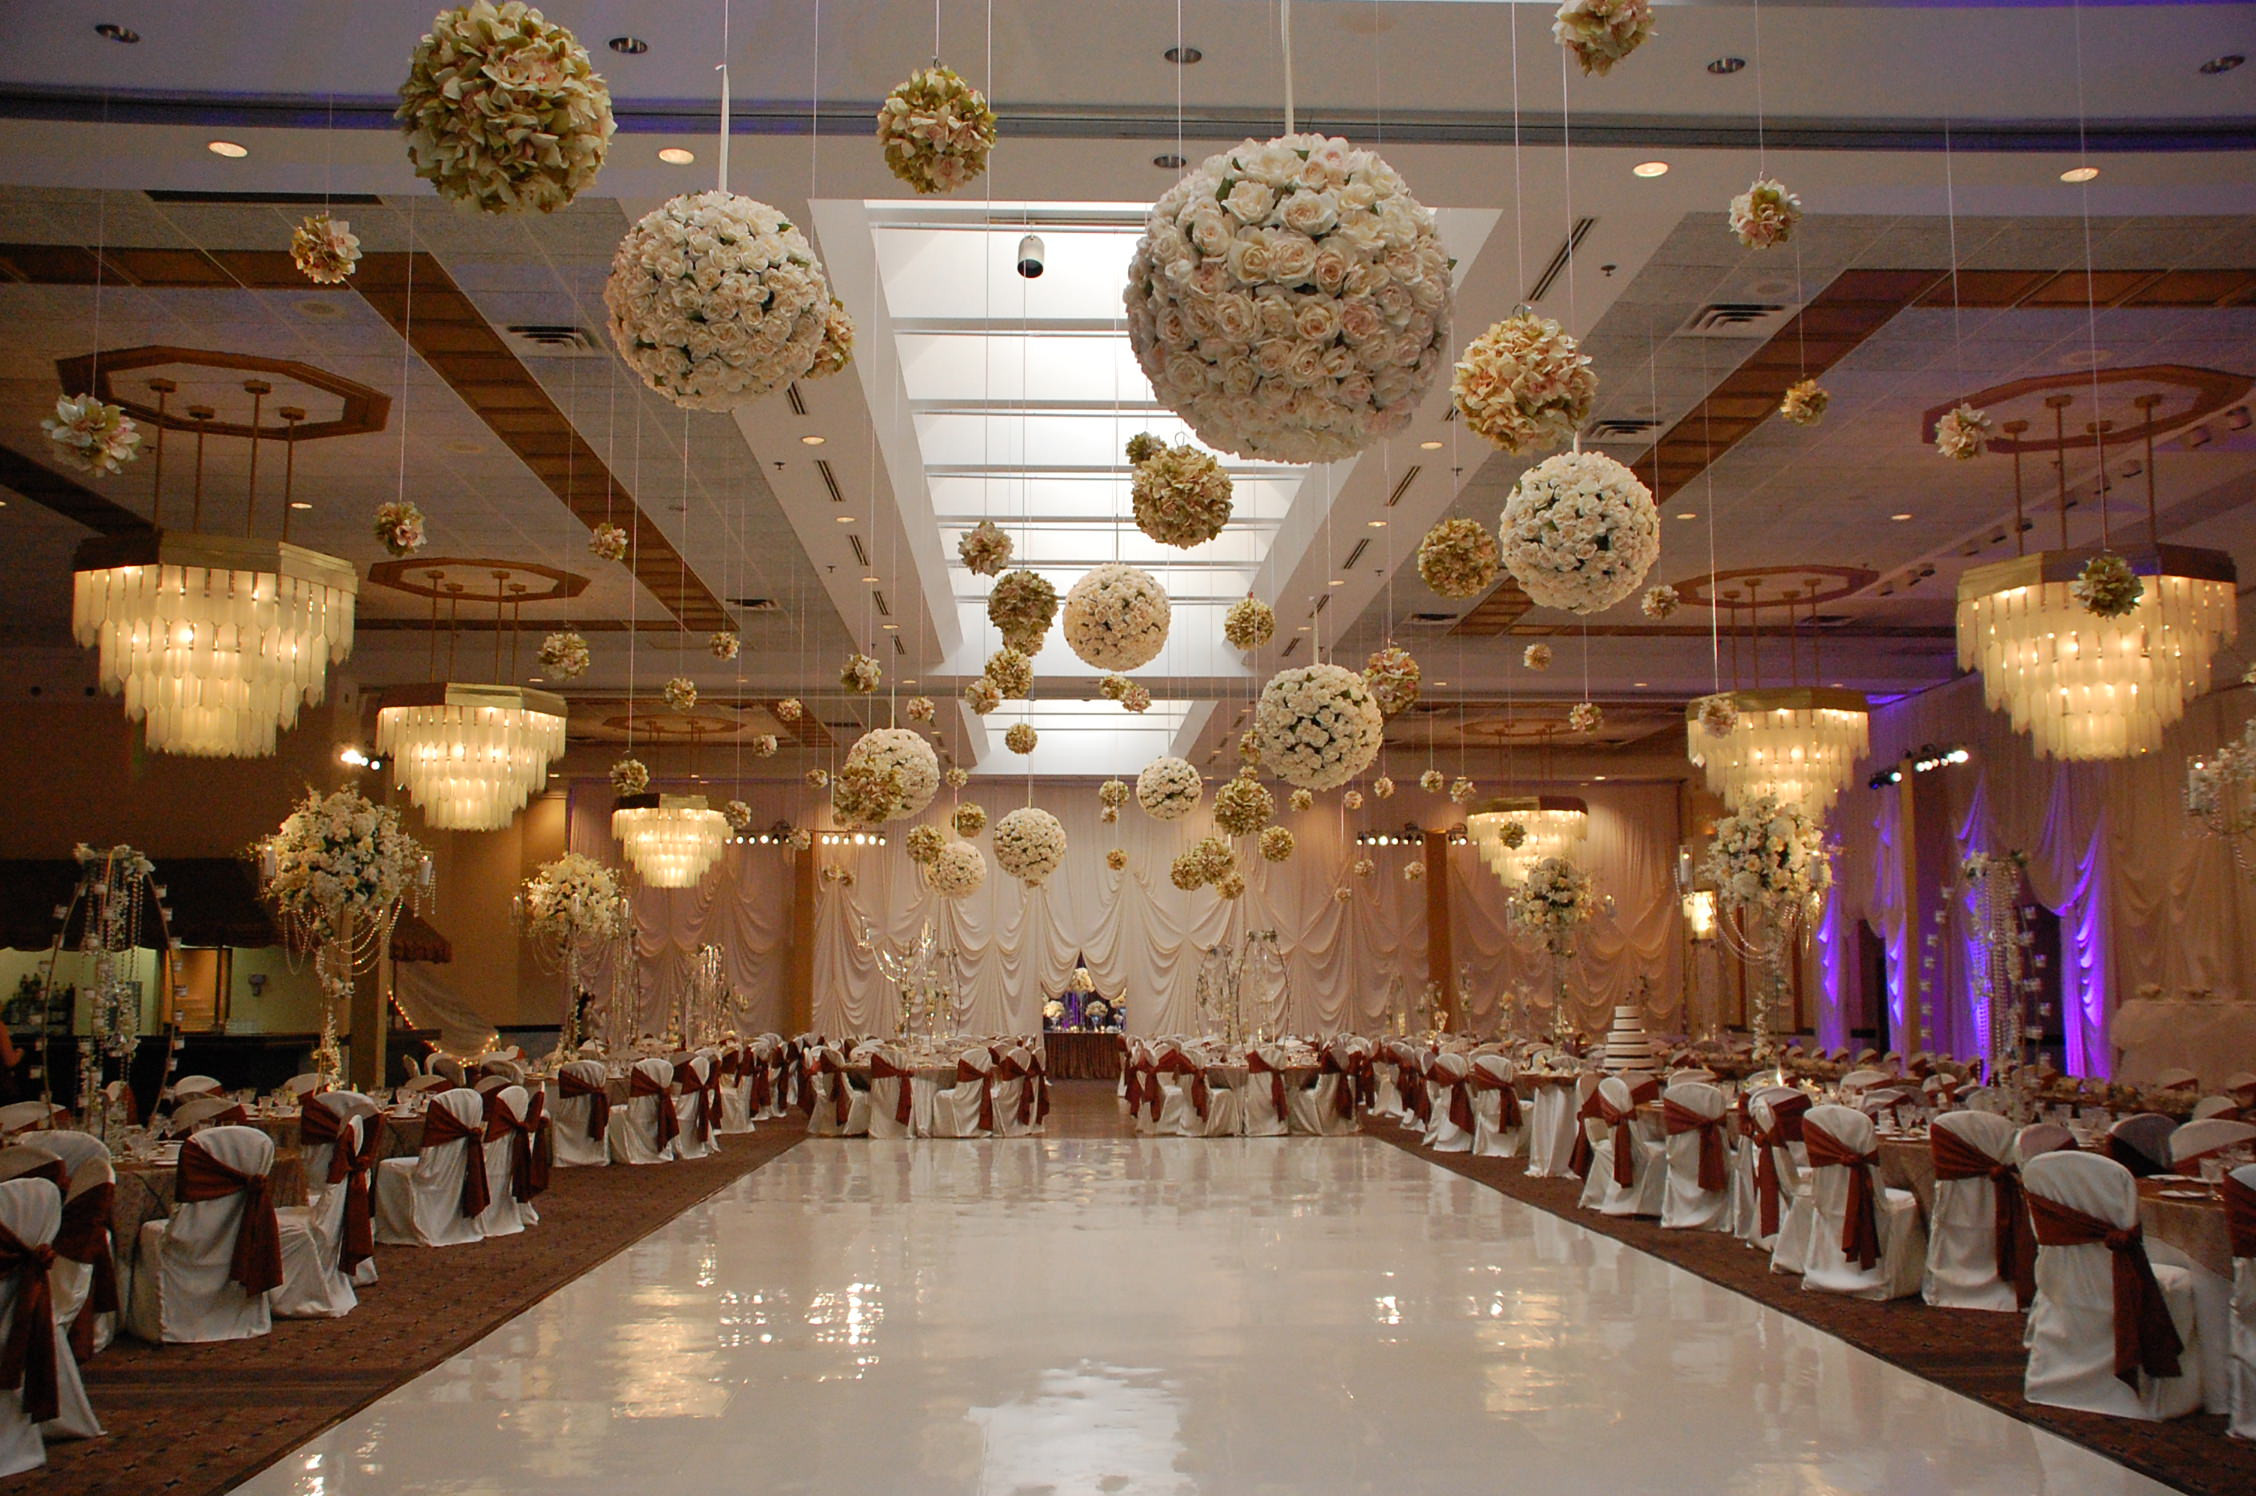 How To Decorate For A Wedding Reception
 10 Bud Wedding Reception Decoration Ideas